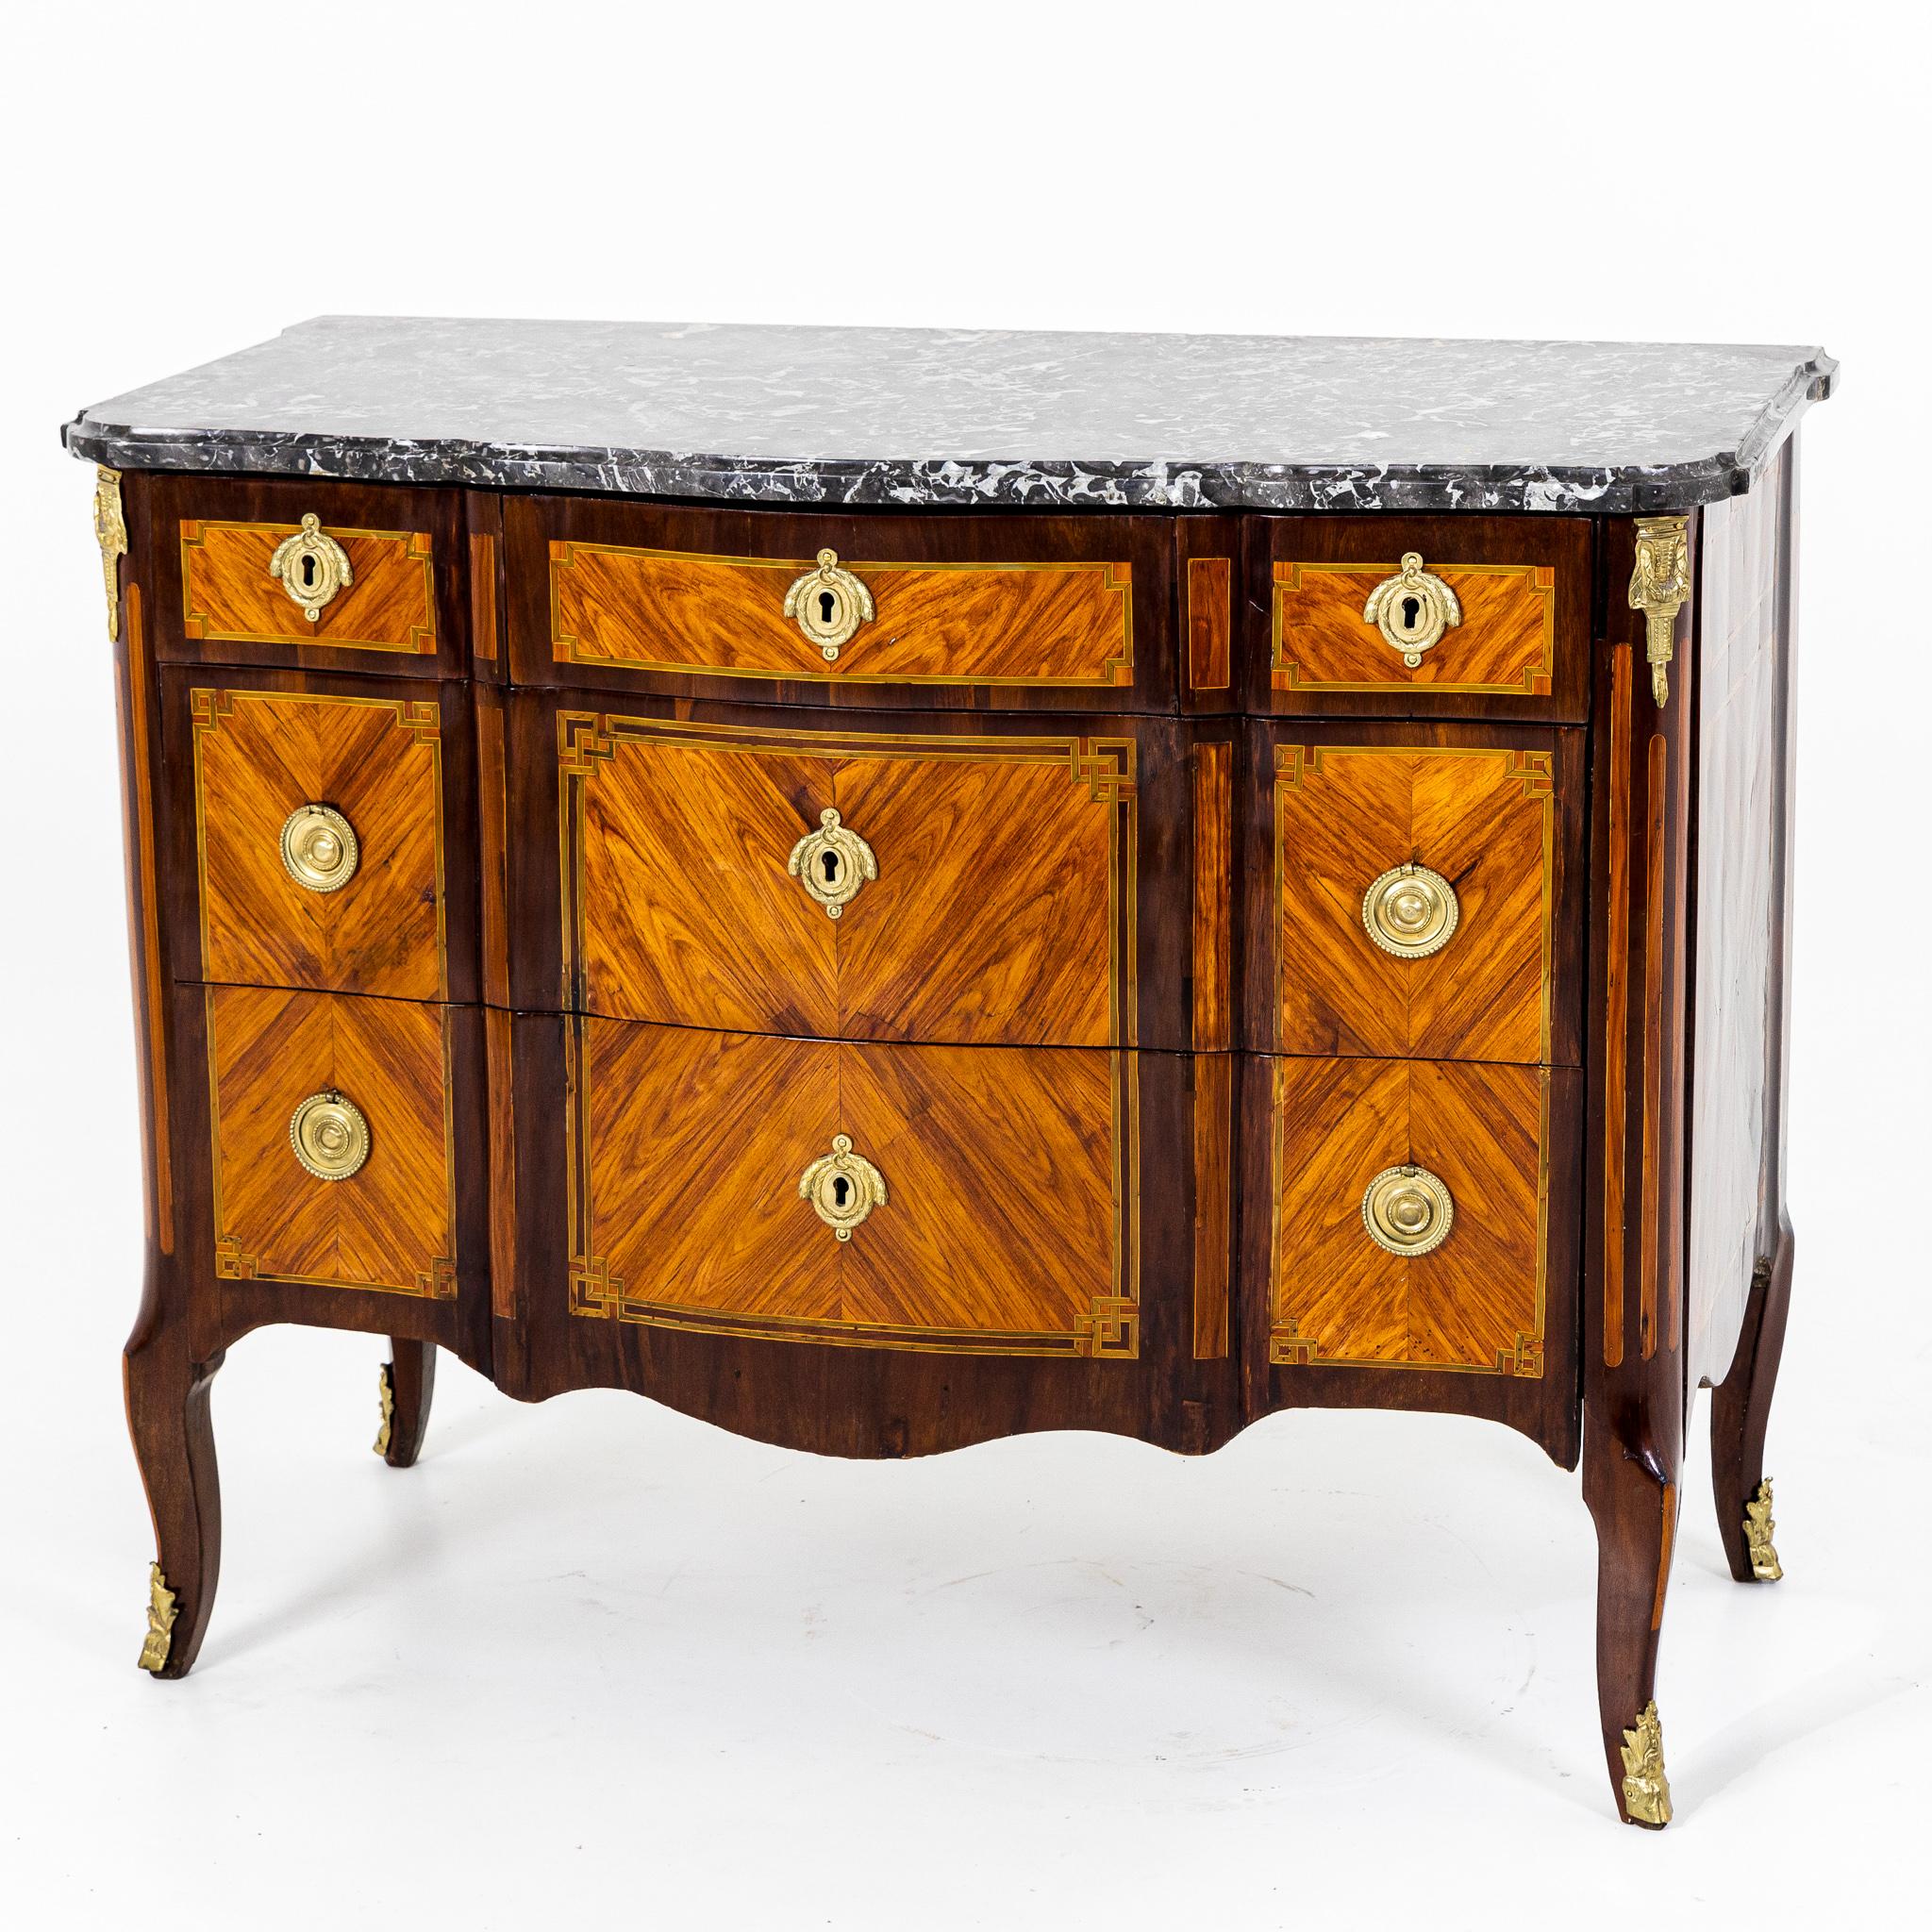 Chest of drawers standing on s-shaped legs with five drawers, curved frame and gray-white marble top. The body is veneered on all sides and decorated with framing band inlays.